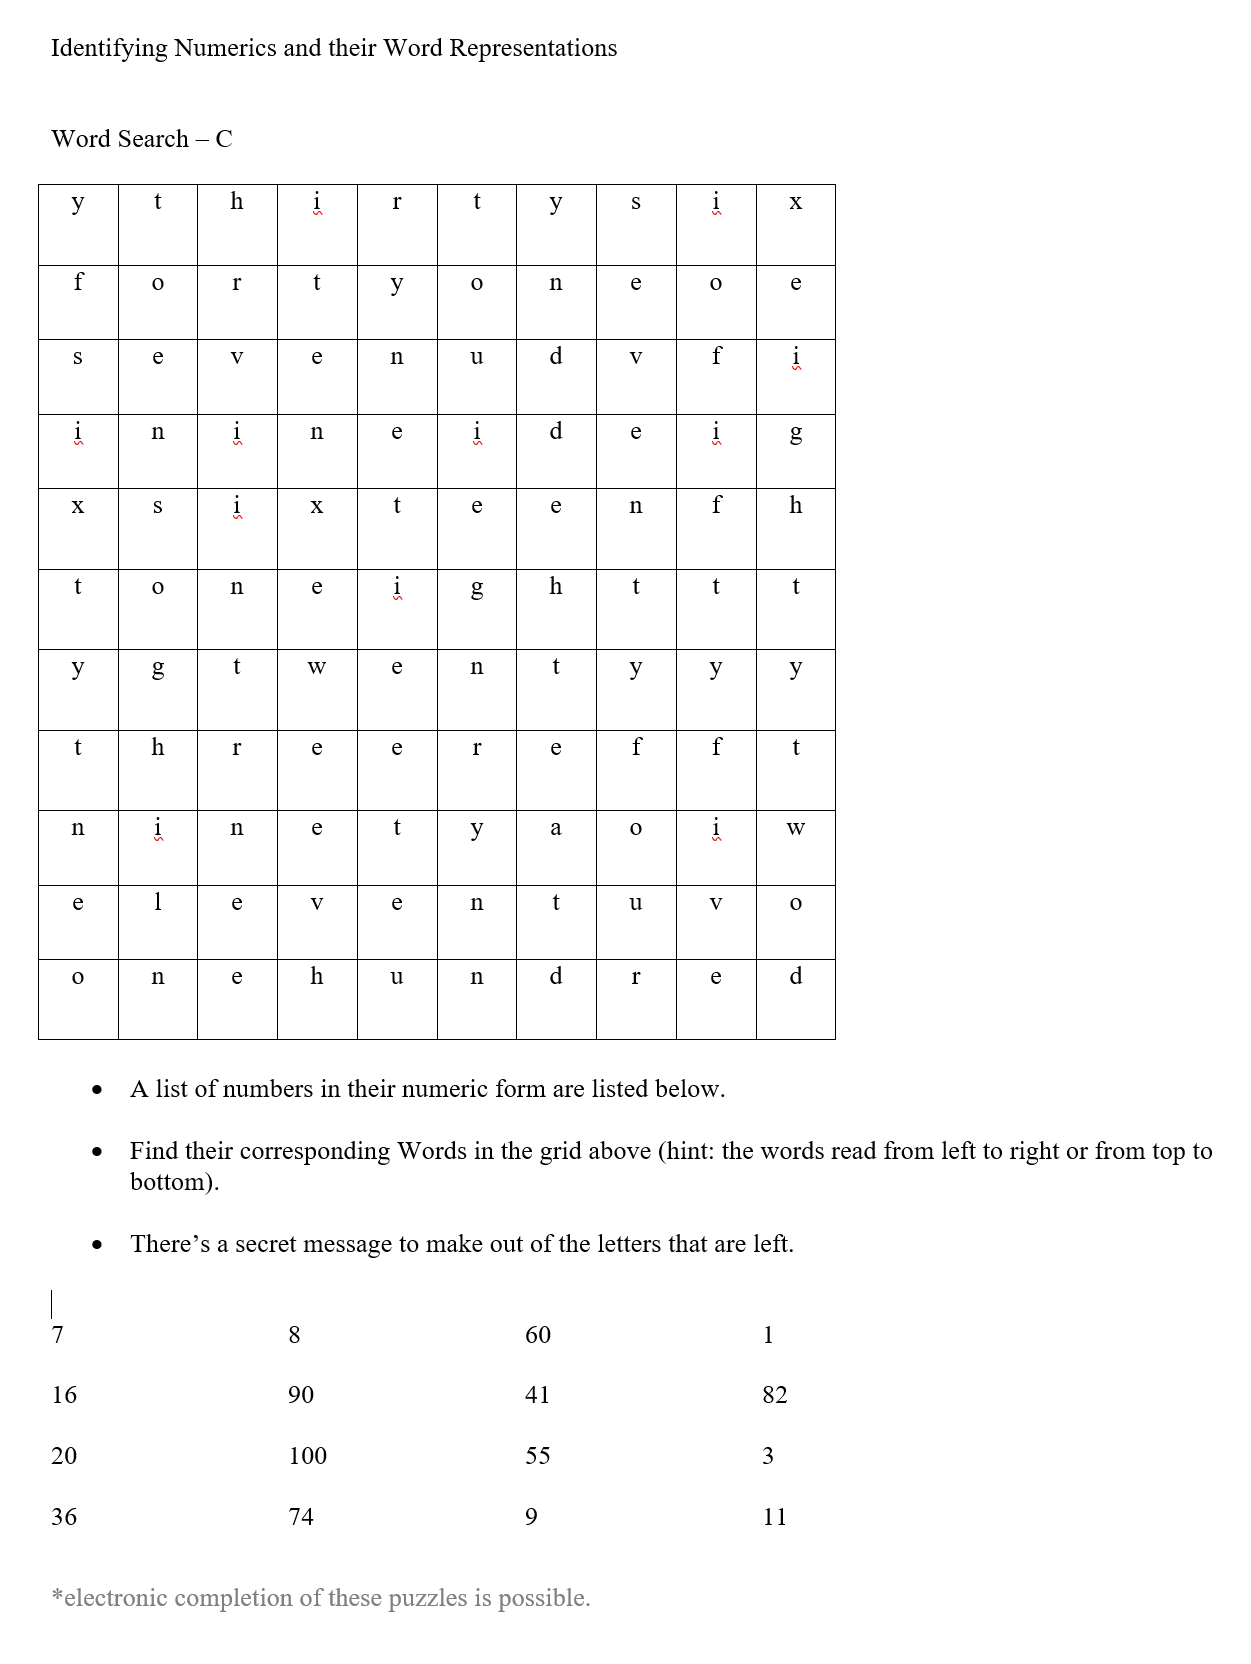 word searches re_ finding number word representations pg 3 of 4